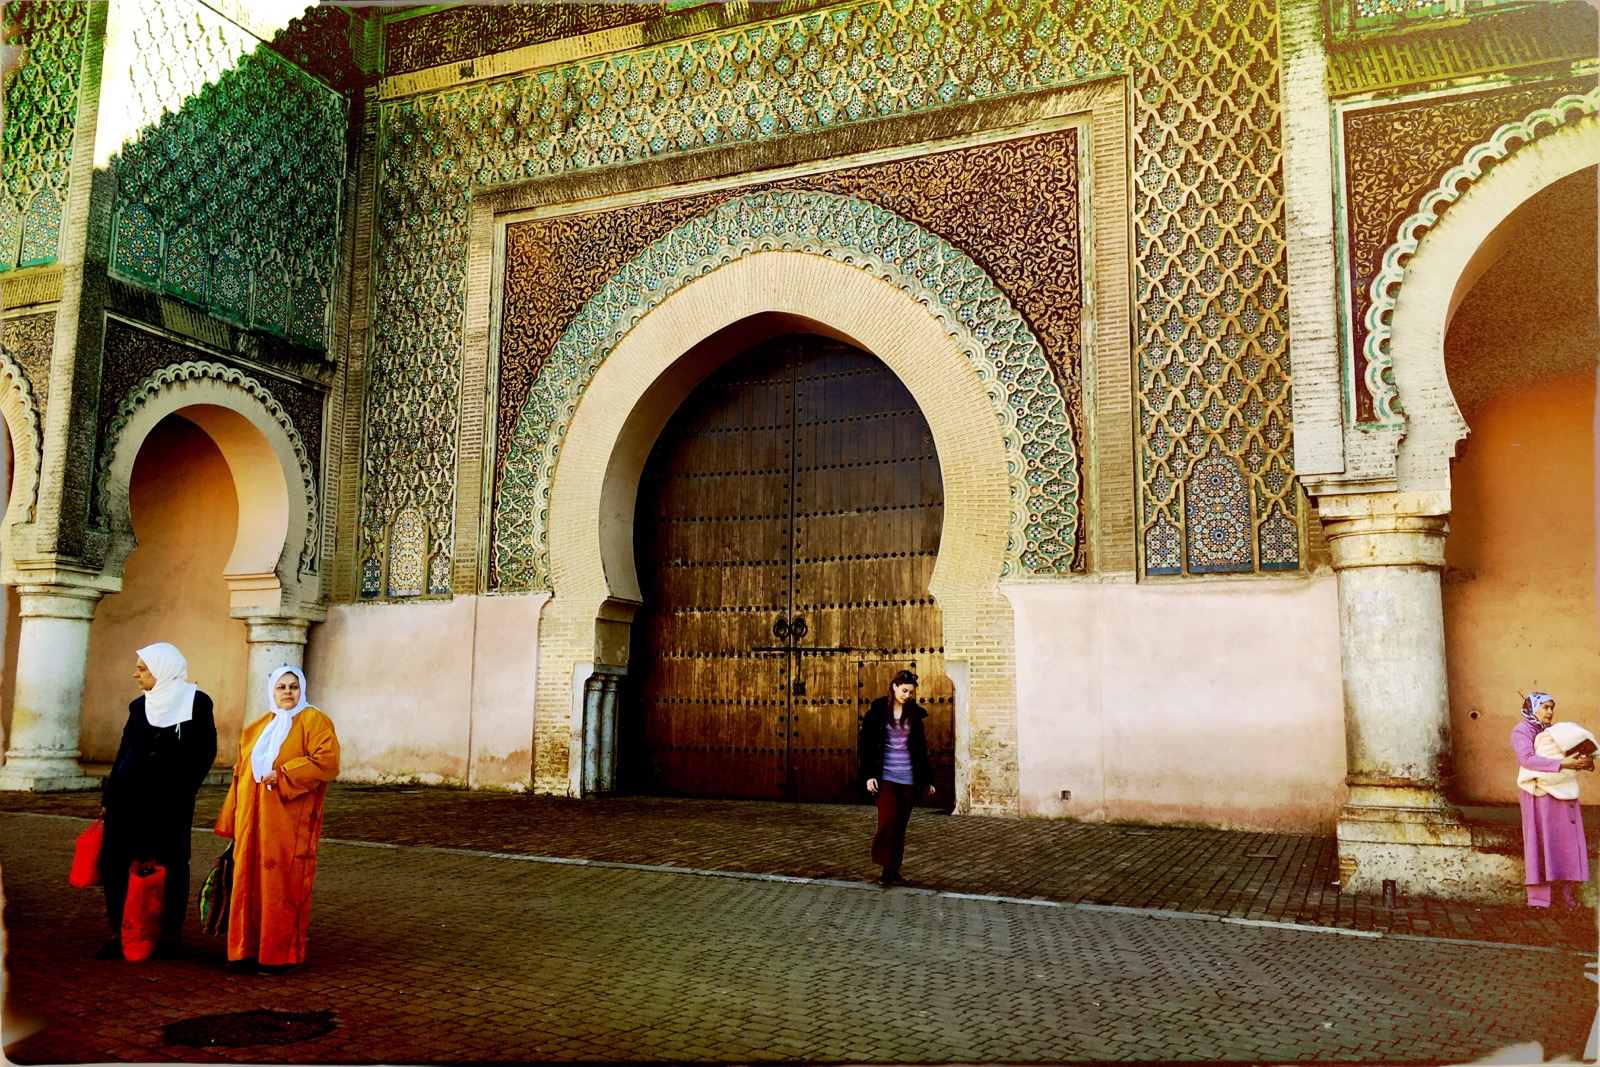 Wait for me by the gate  (Meknes)